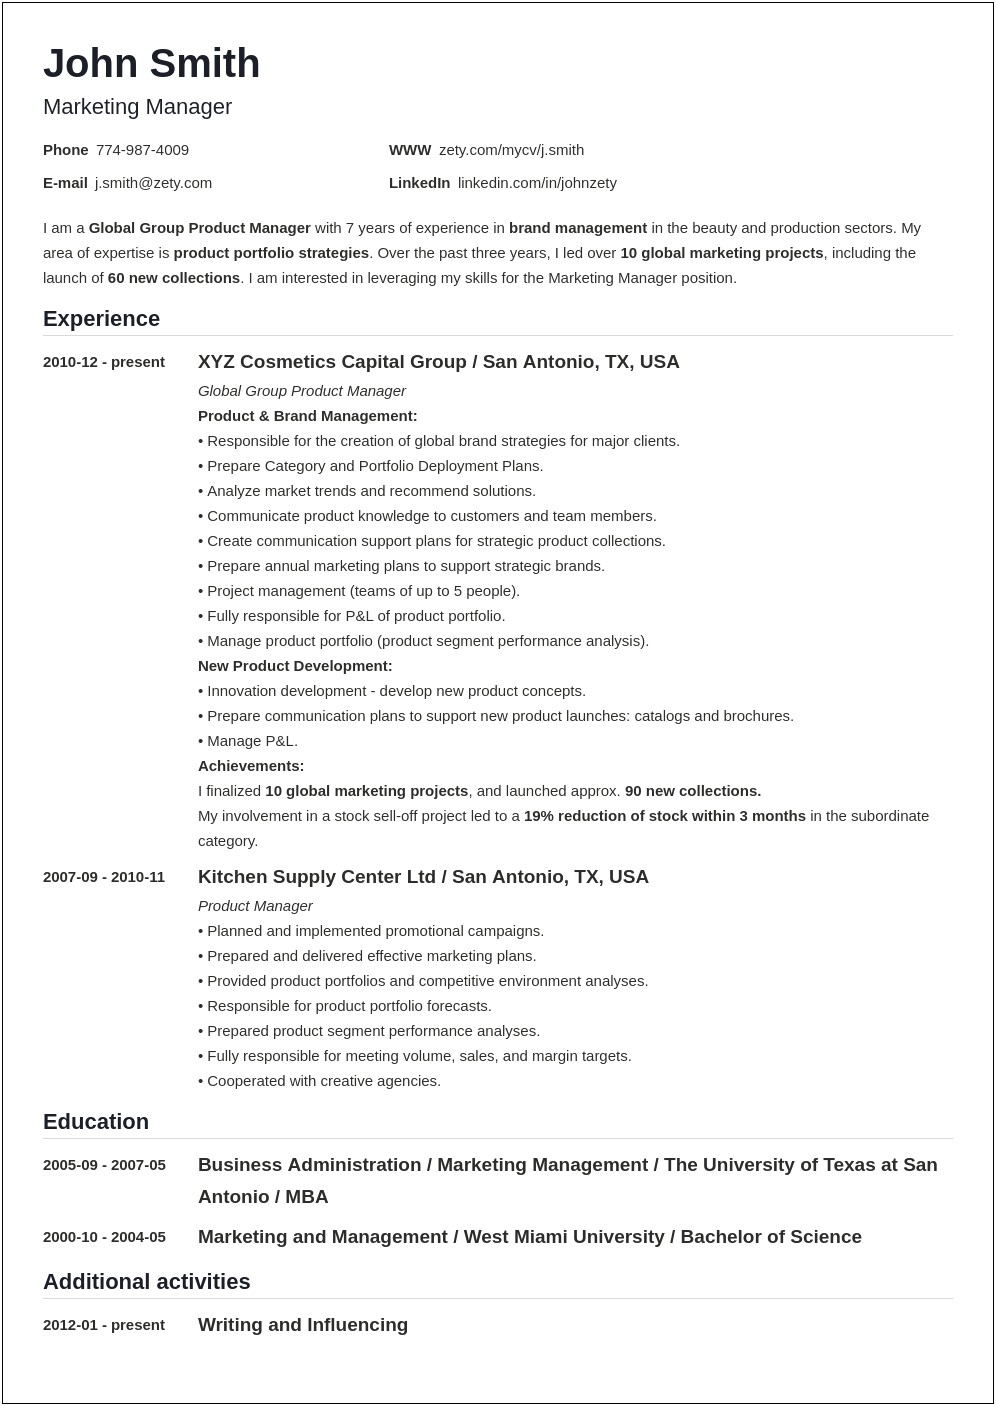 Can You Combine Education And Experience On Resume